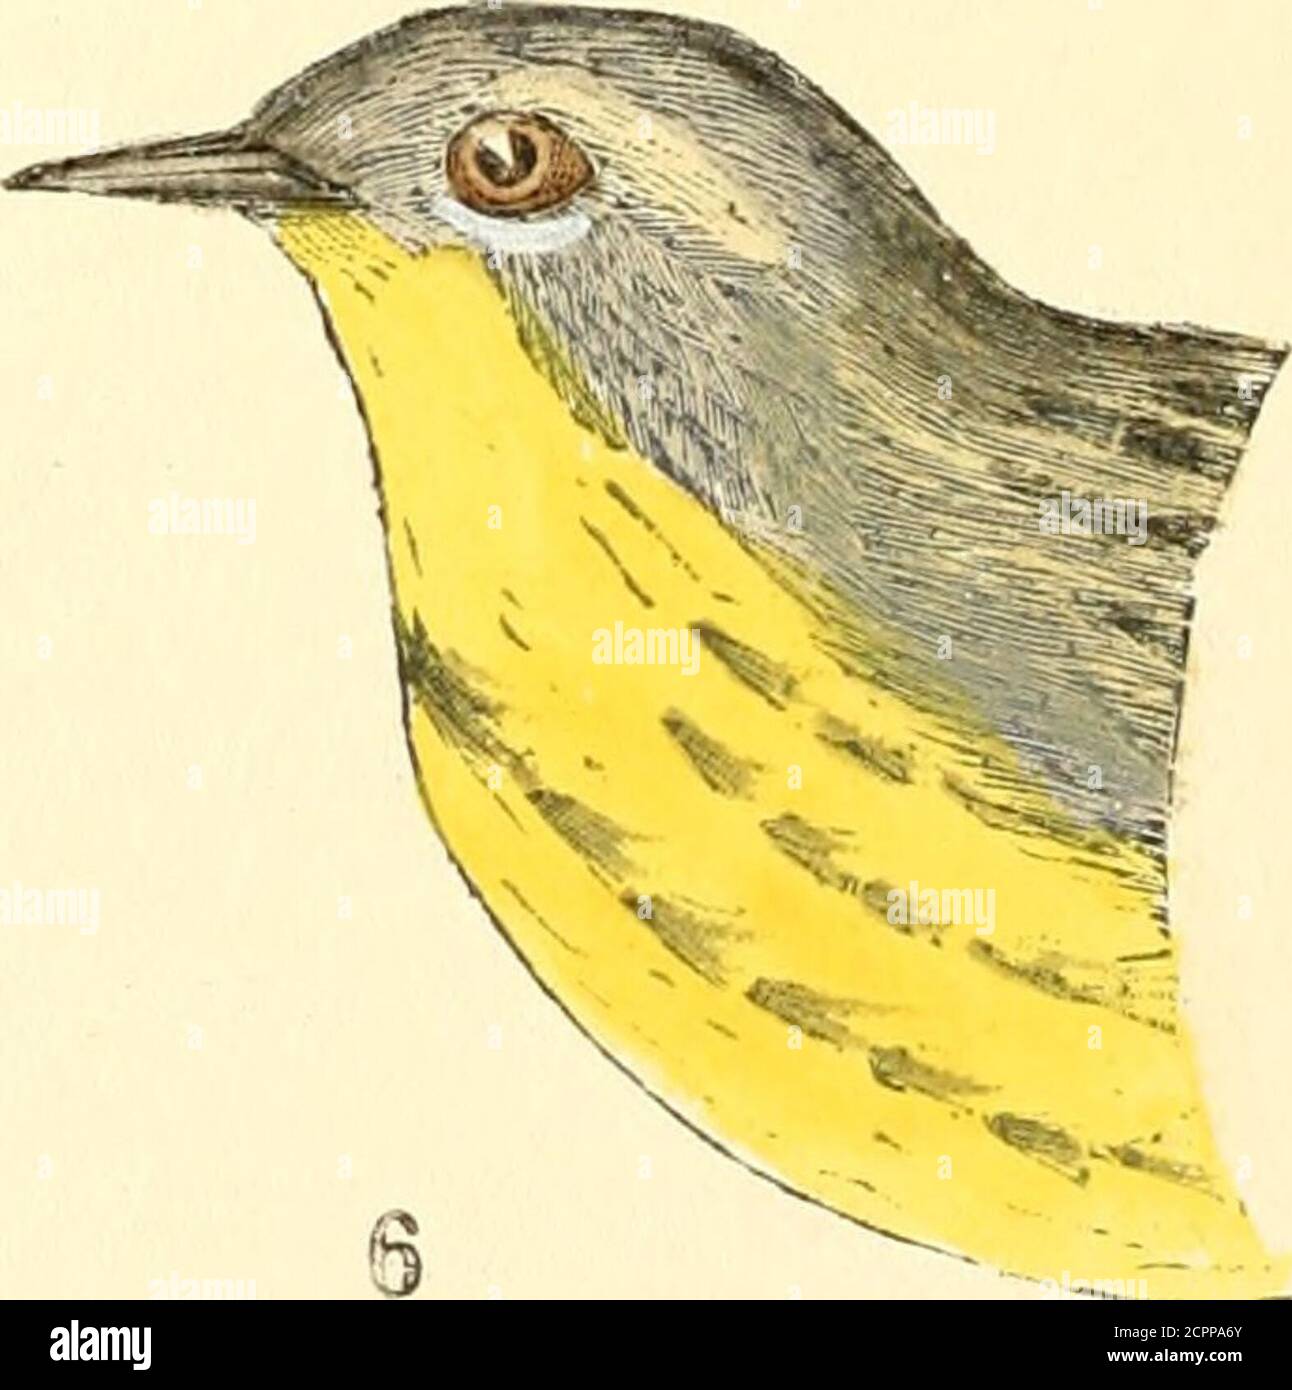 . The warblers of New England . J^sisvad aud liaud-eolor^S by C. J. llaynard. Yellow ruiiiped Warbler, 1, male, 2, female*Aul)ul)&lt;)iis • 3, 4, Black and Yellow 5* O, CAPE MAY AVARBLER. Nests which have been actually taken since that time.but elsewhere, were found in evergreen trees, but not farfrom the ground. Just what the breeding habits of the Cape May Warb-ler were in the coniferous forests about Lake Umbagog.where it was once so abundant as a summer visitor, wemay never know, for Mr. Brewster, who has visited thisregion constantly, tells me that he has not found this warb-ler anywhere Stock Photo